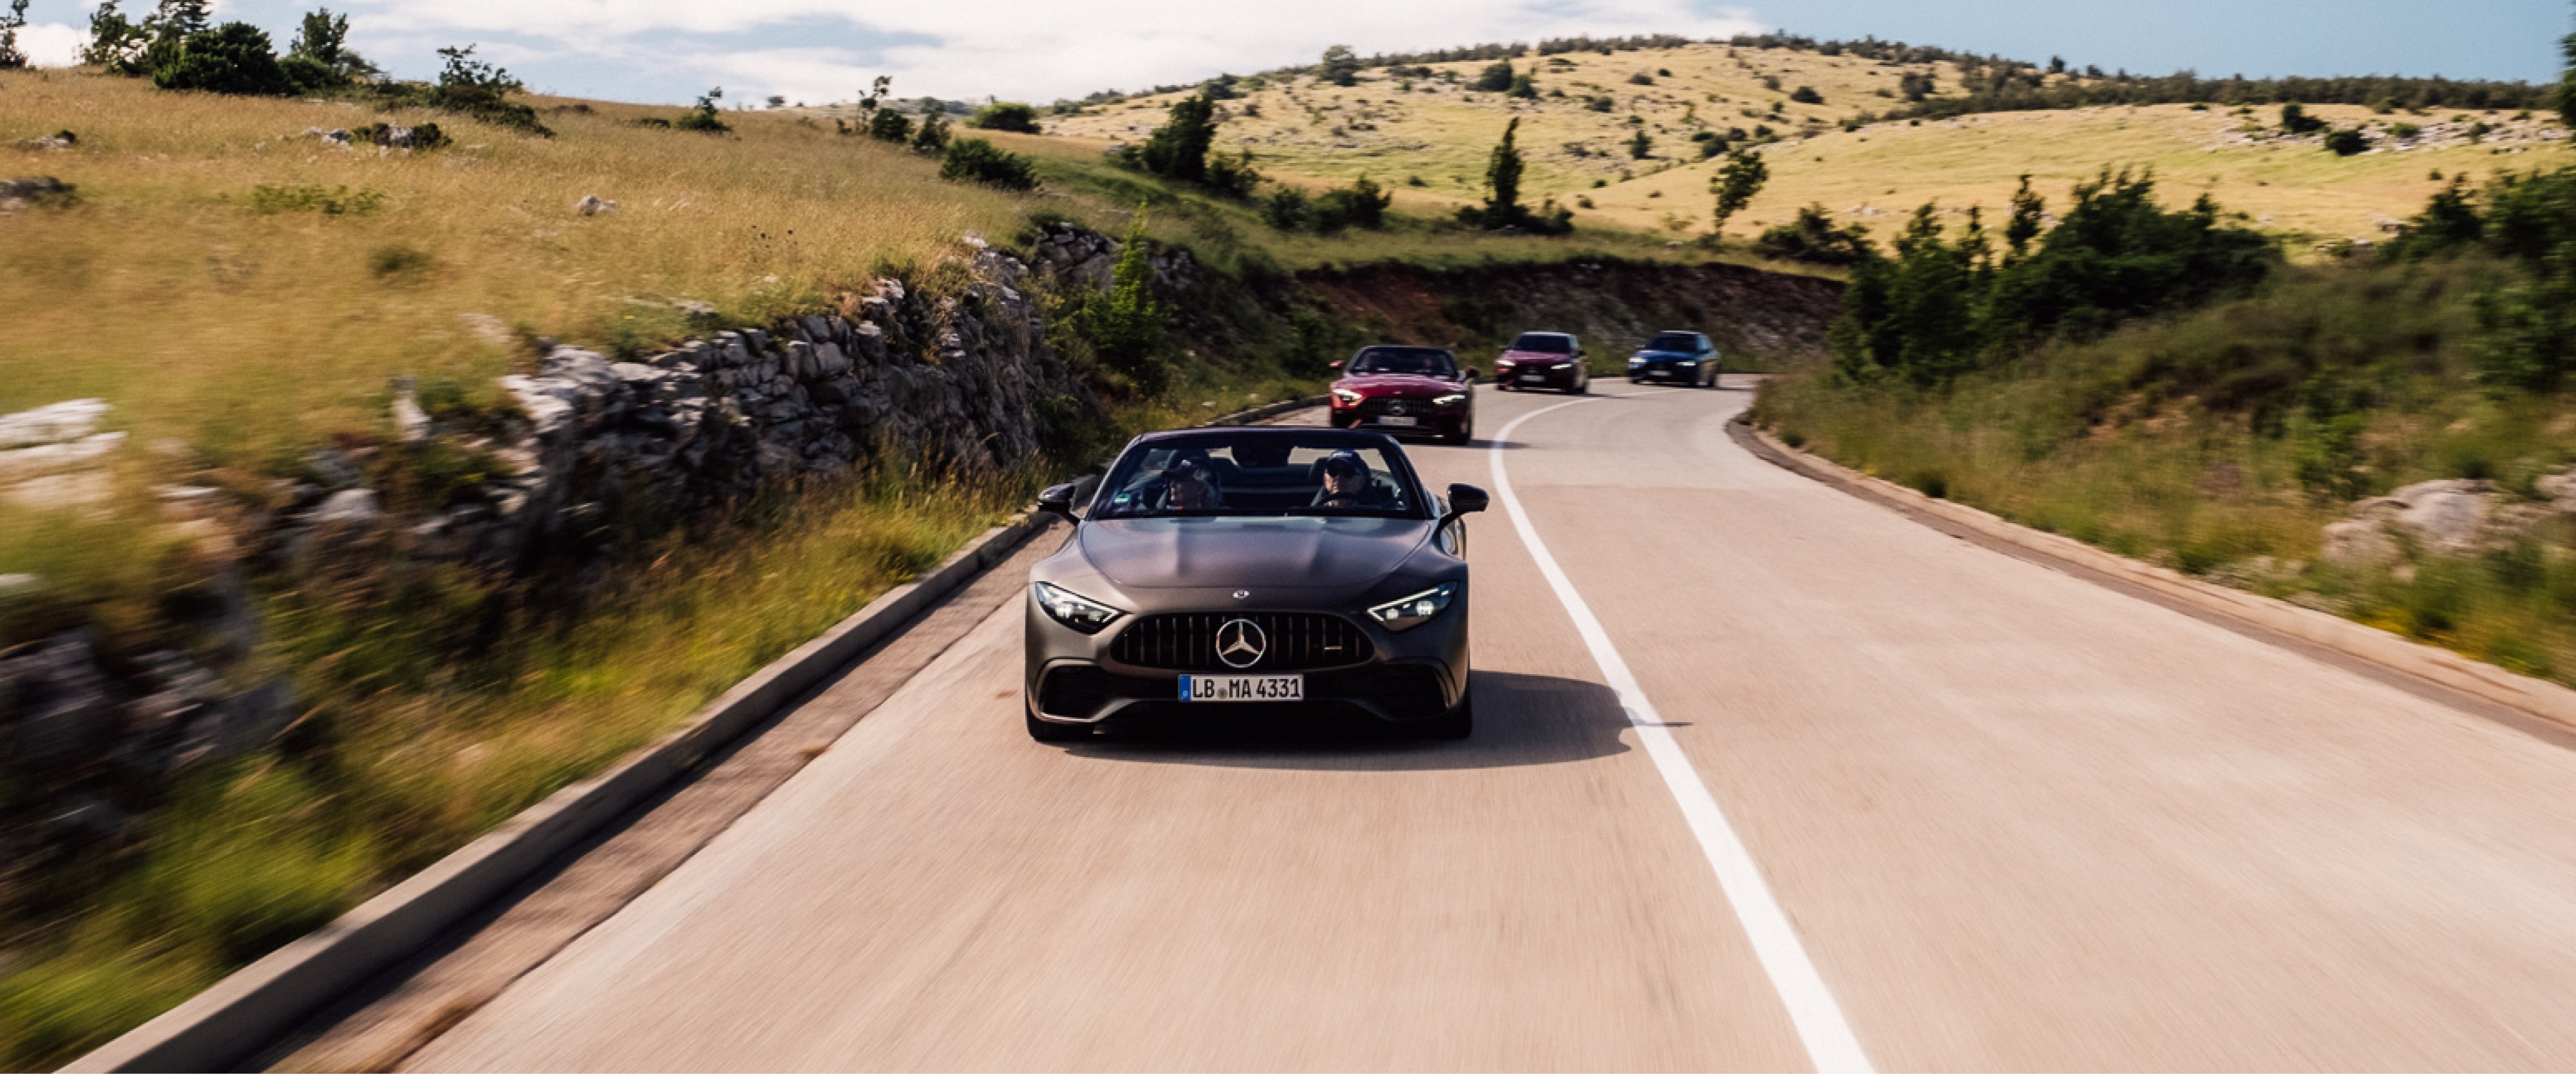 AMG Experience on Road